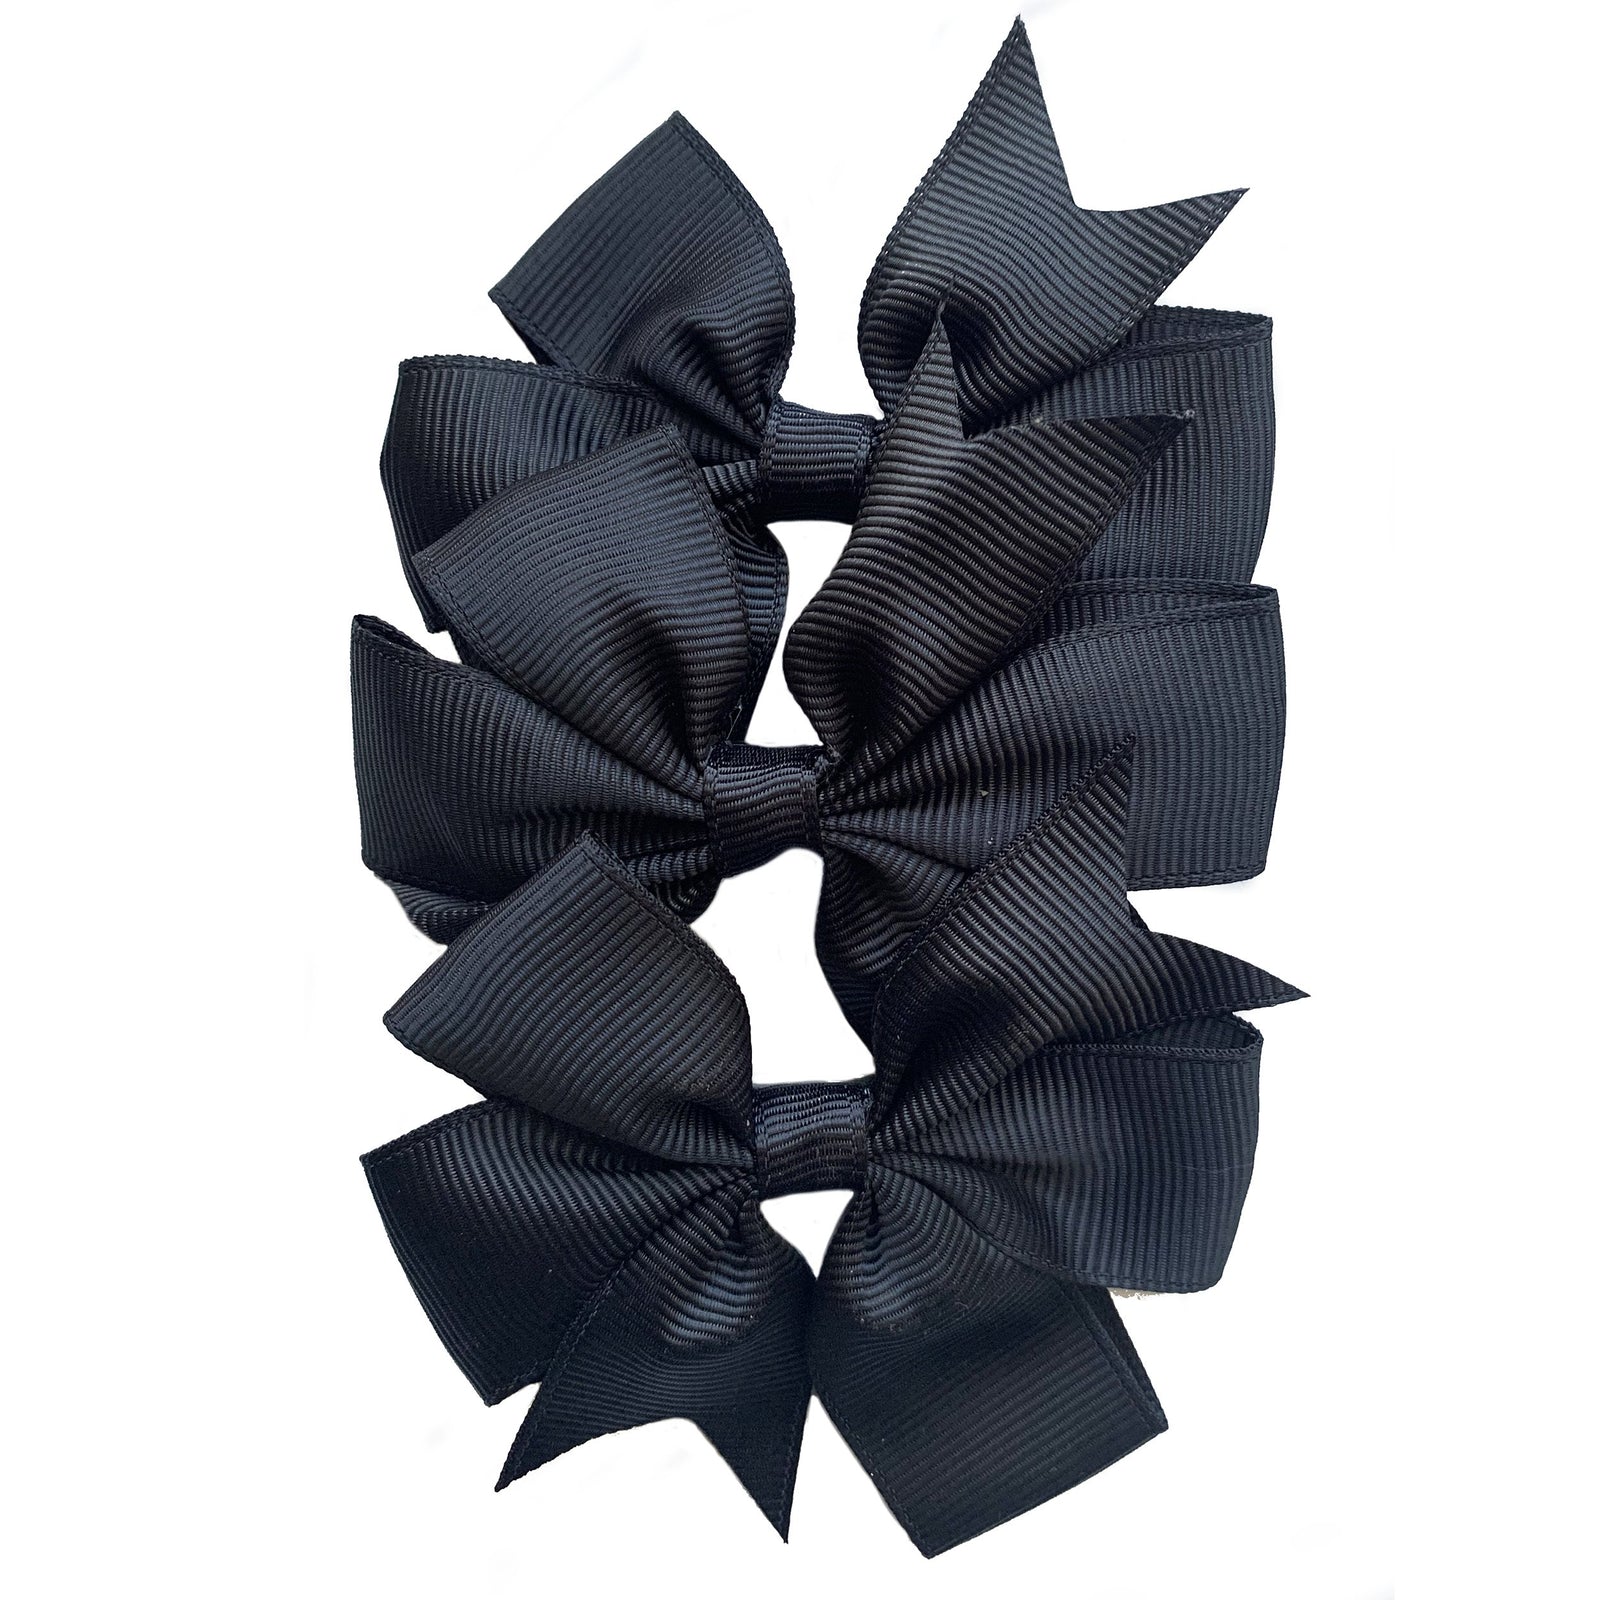 Black 3 inch Ribbon Bow Clips Set of 3 with Alligator Clip